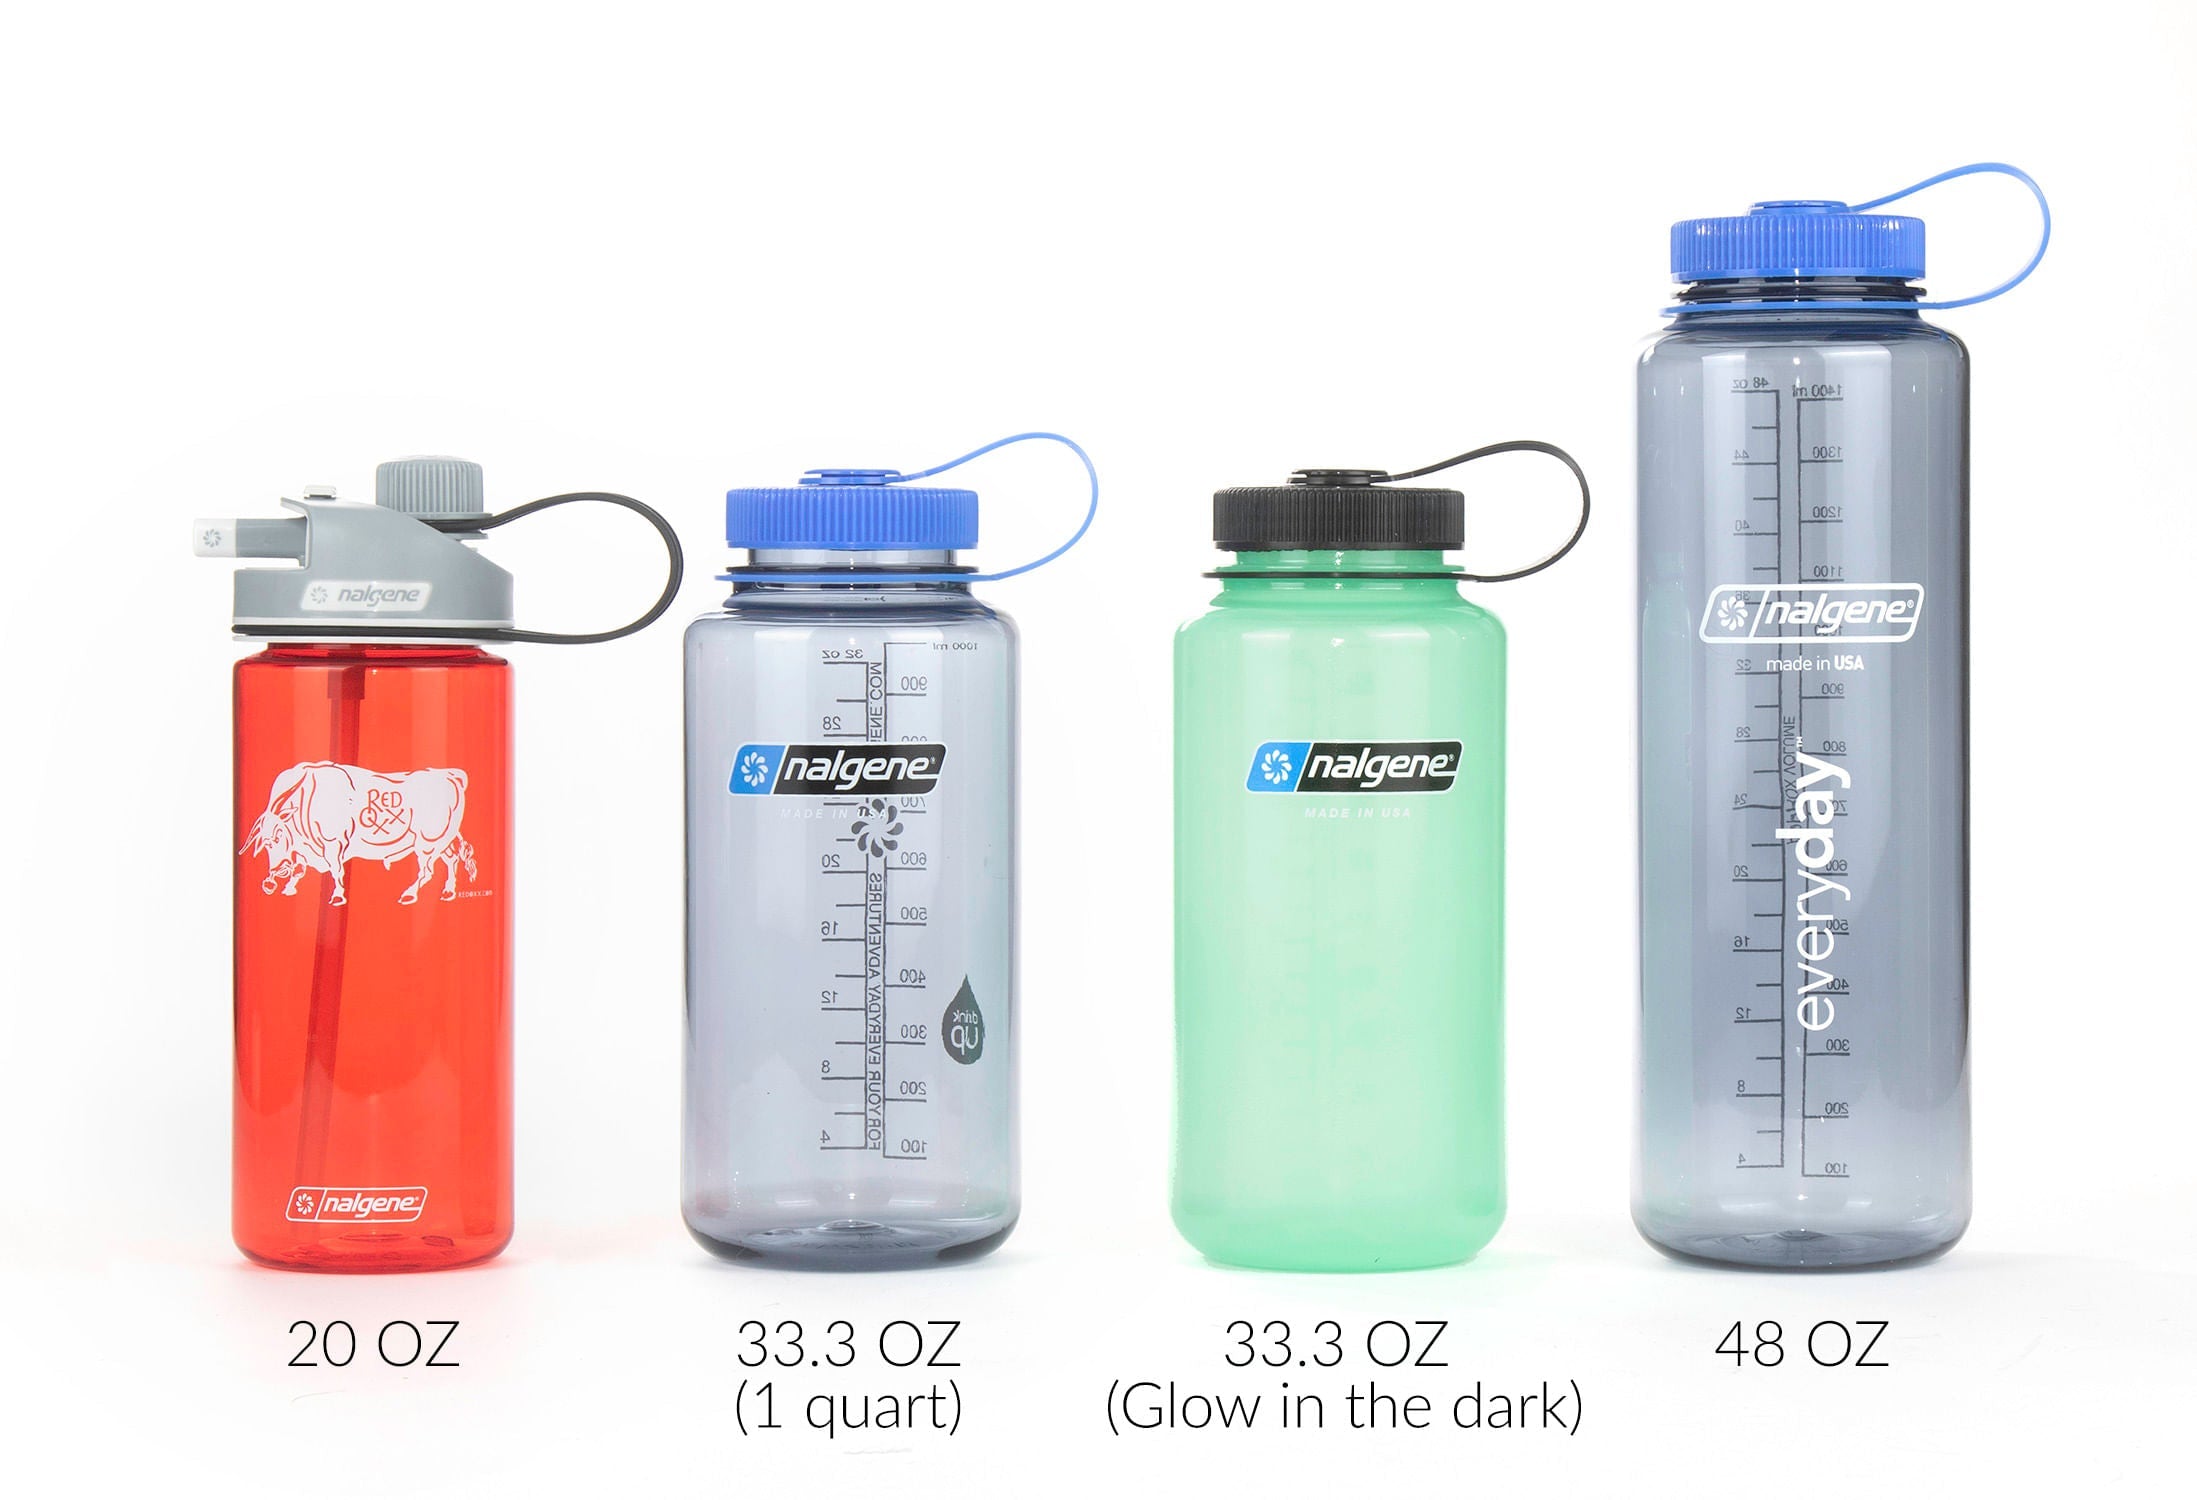 Nalgene comparison from left to right.  20 ounce , 33.3 ounce , 33.3 ounce glow in dark, 48 ounce 